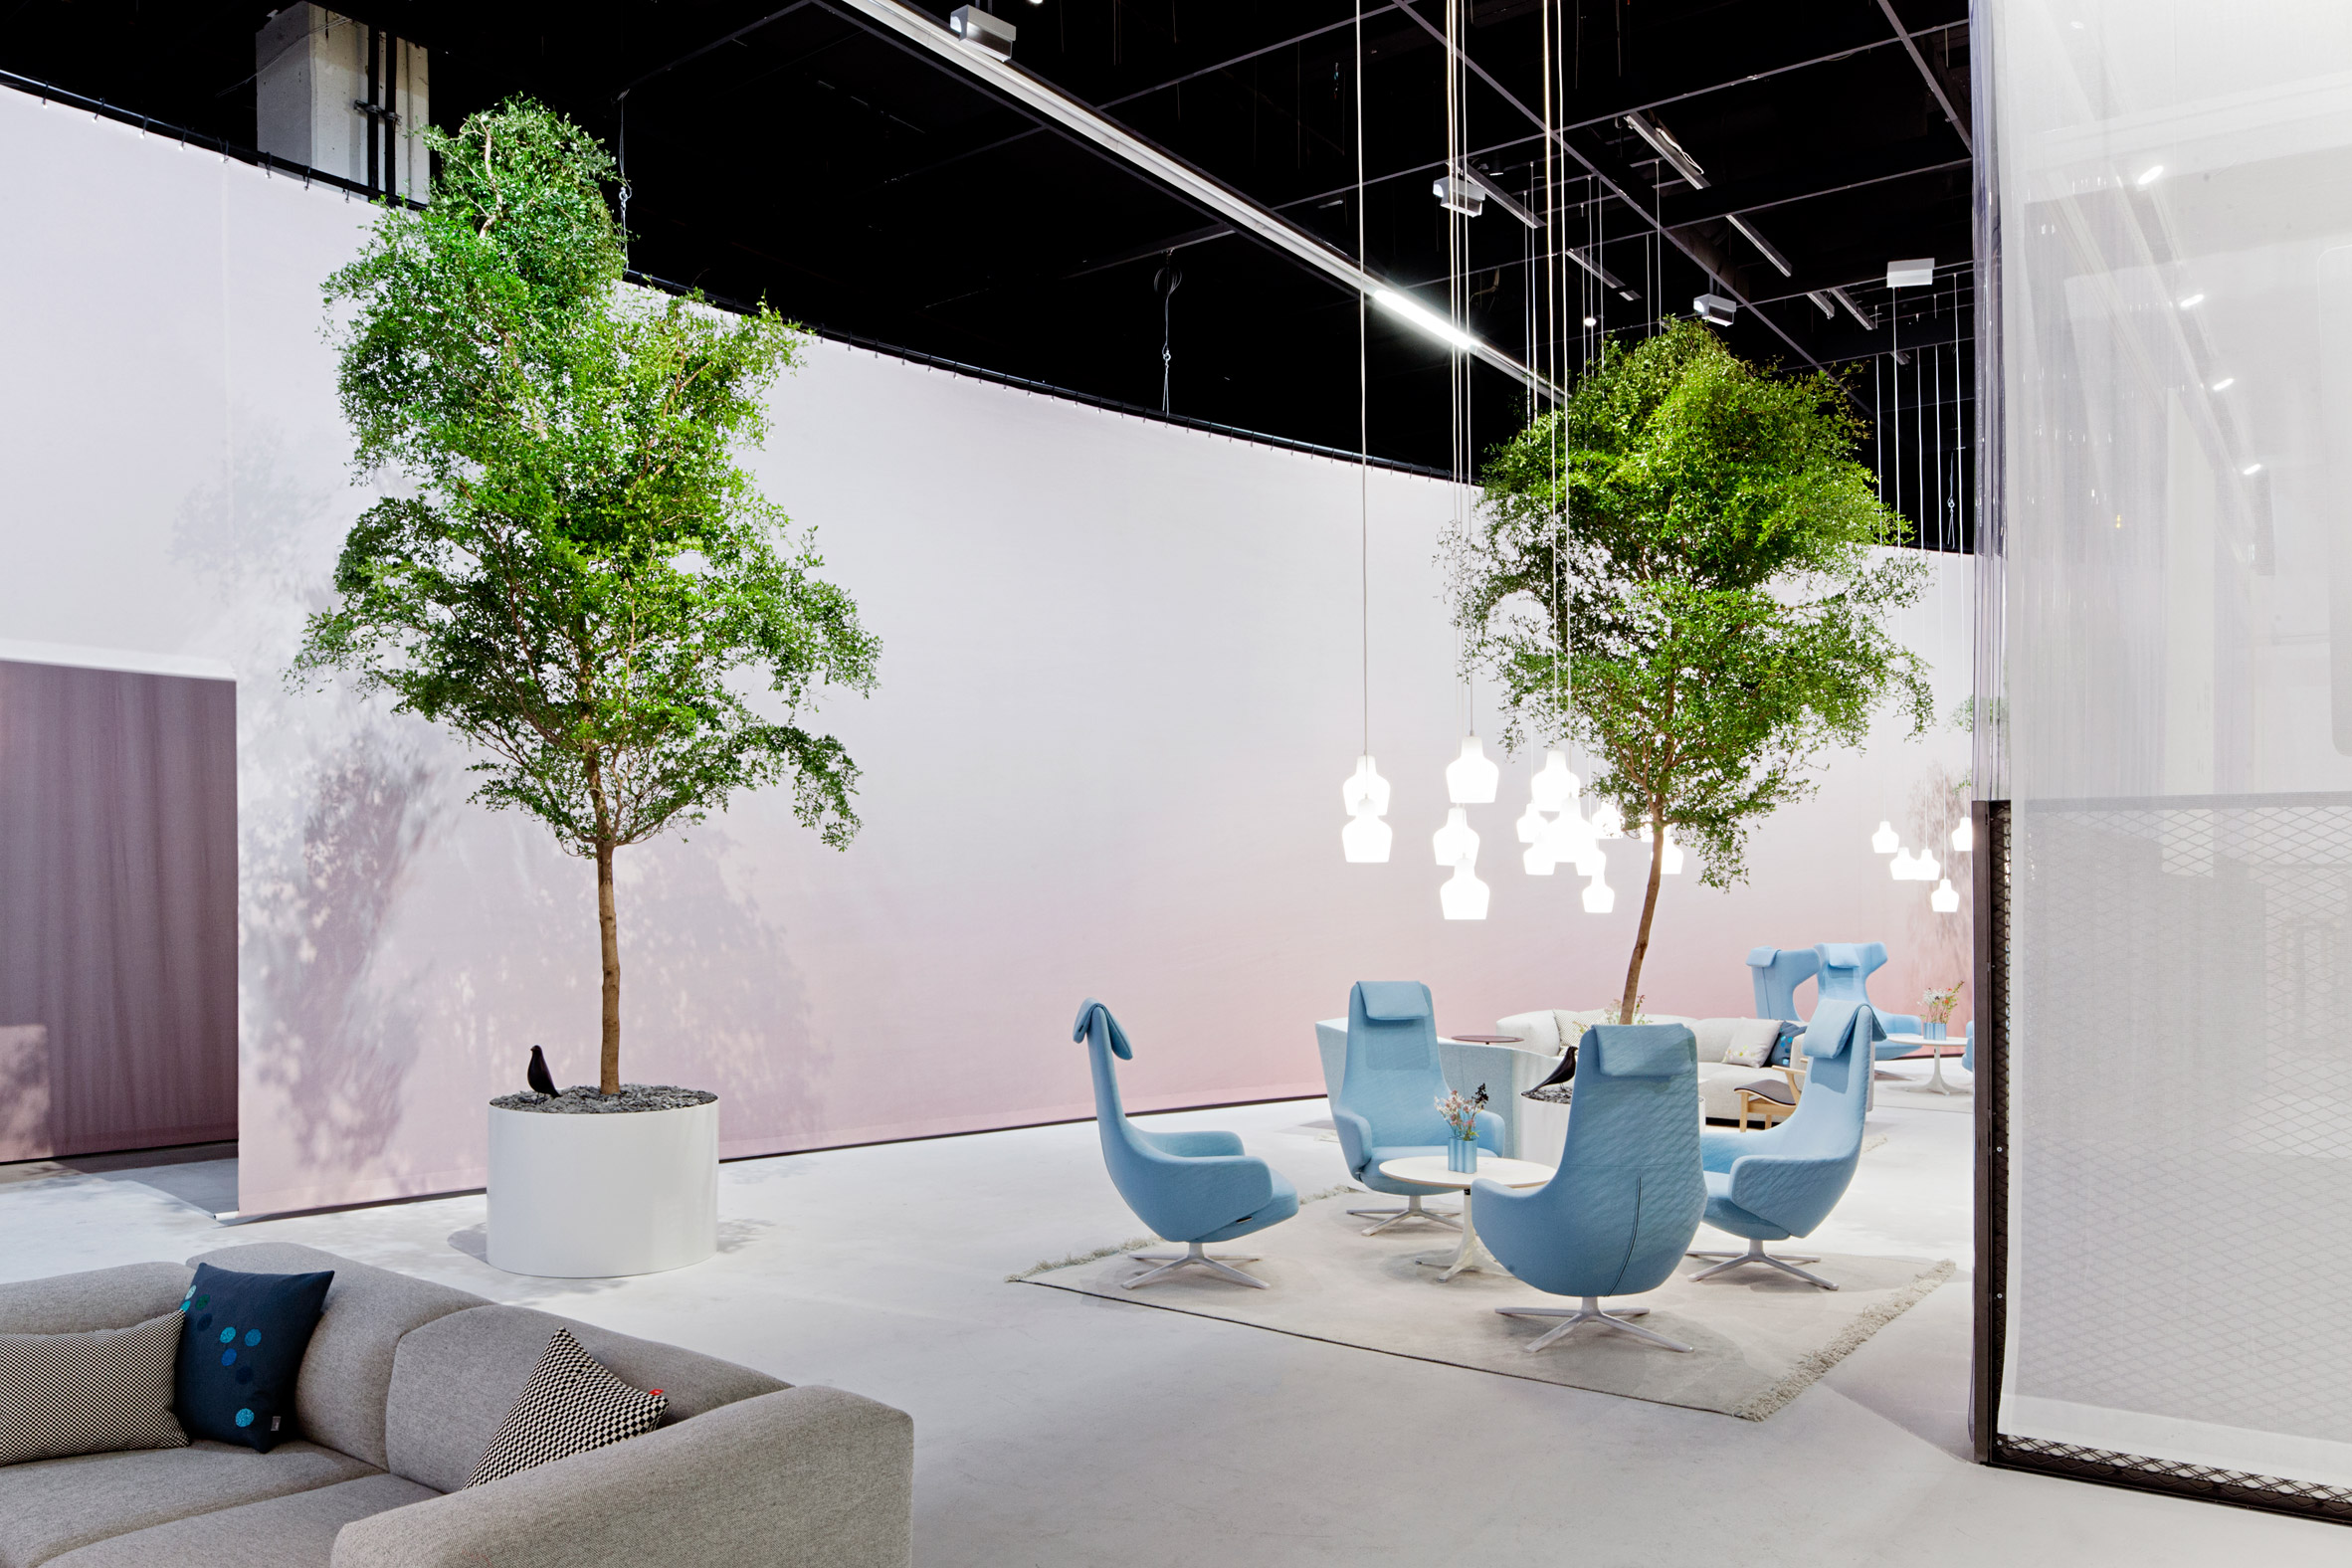 Pernilla Ohrstedt explores contemporary office spaces for Vitra exhibition at Orgatec